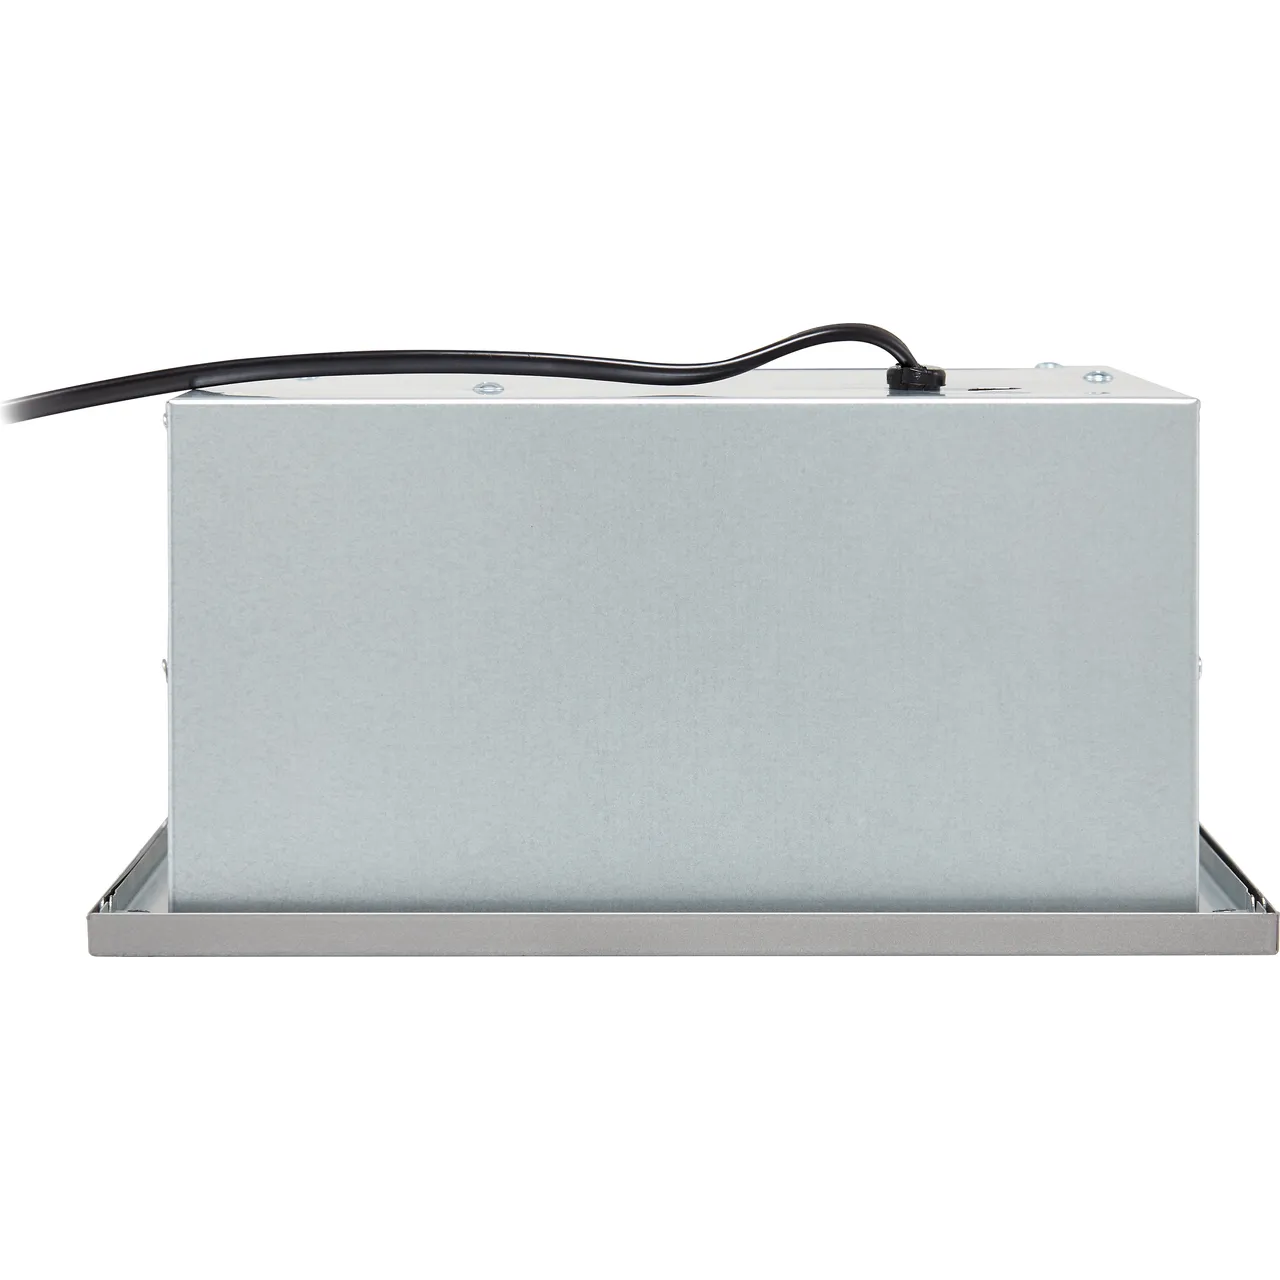 Candy Canopy Cooker Hood Built-in Stainless Steel 52cm Silver CBG52SX 0163